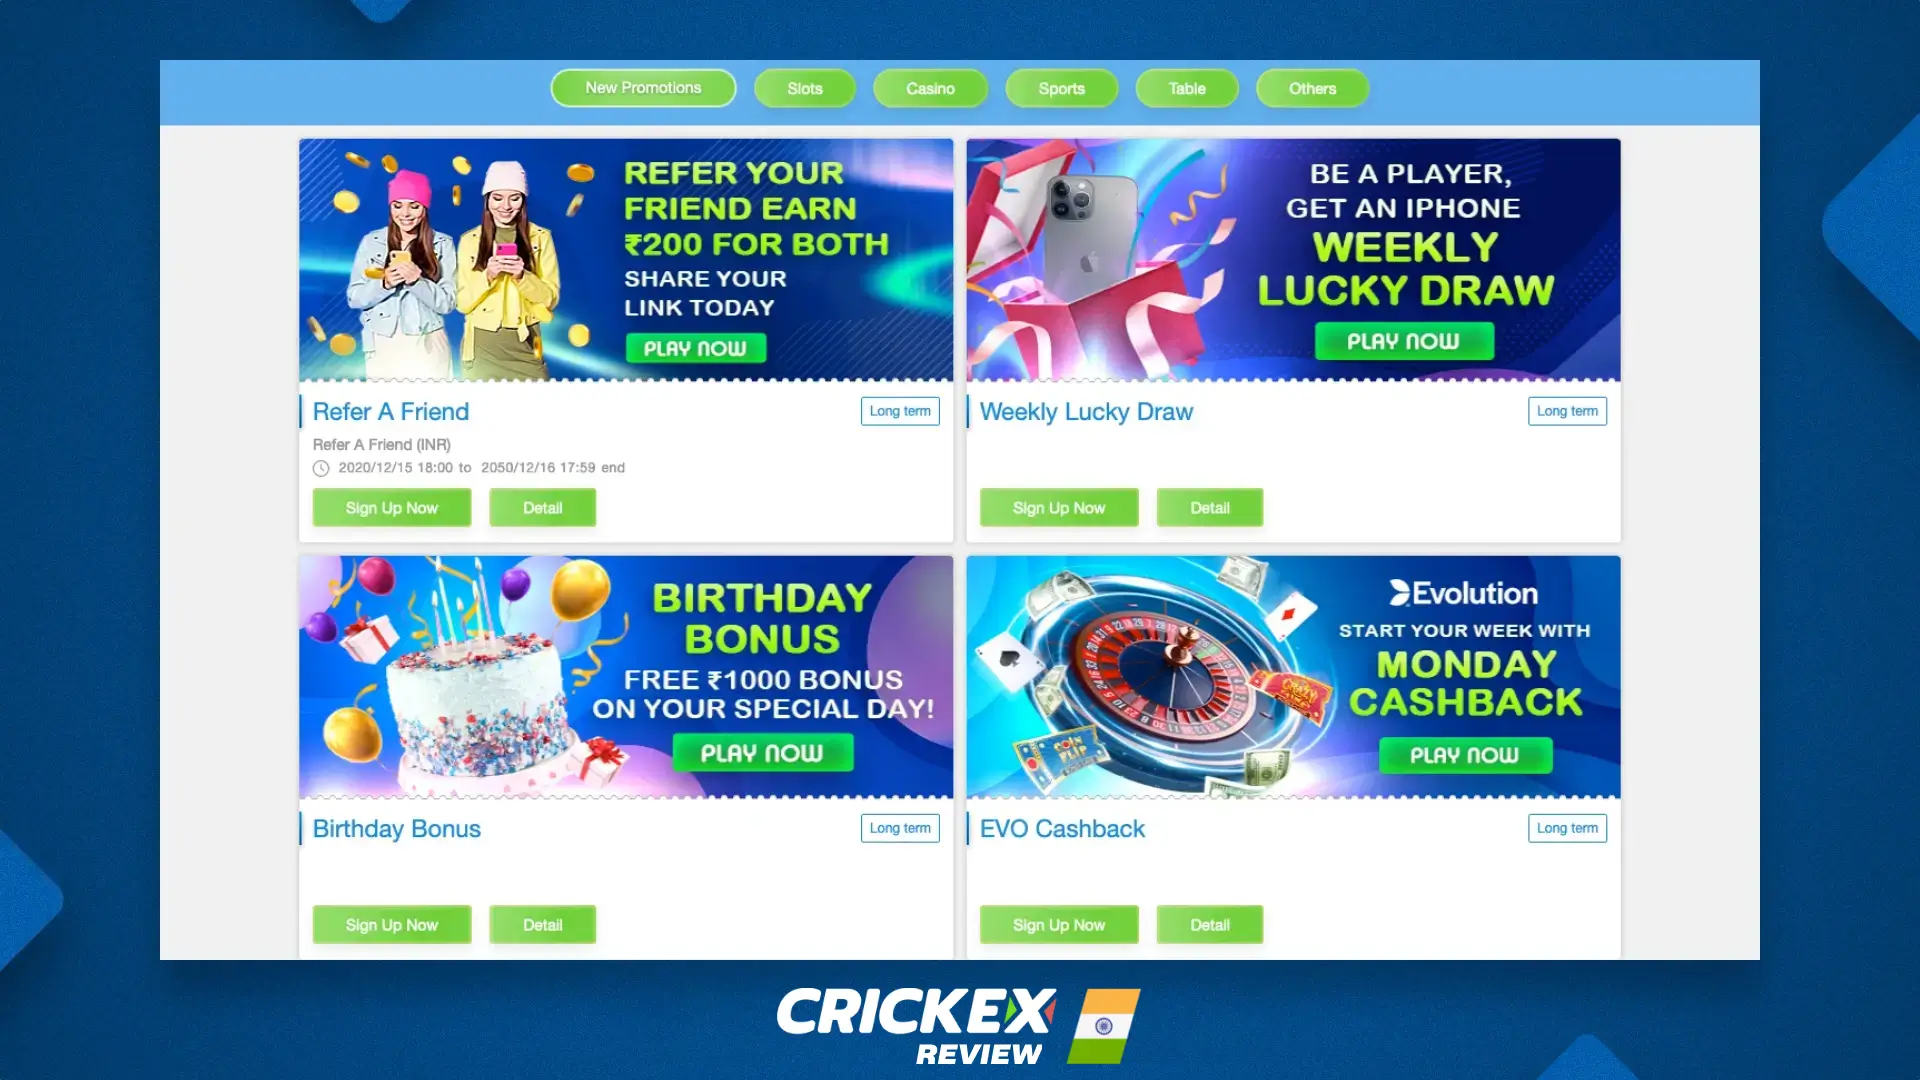 Available Crickex bonuses and promotions for players from India